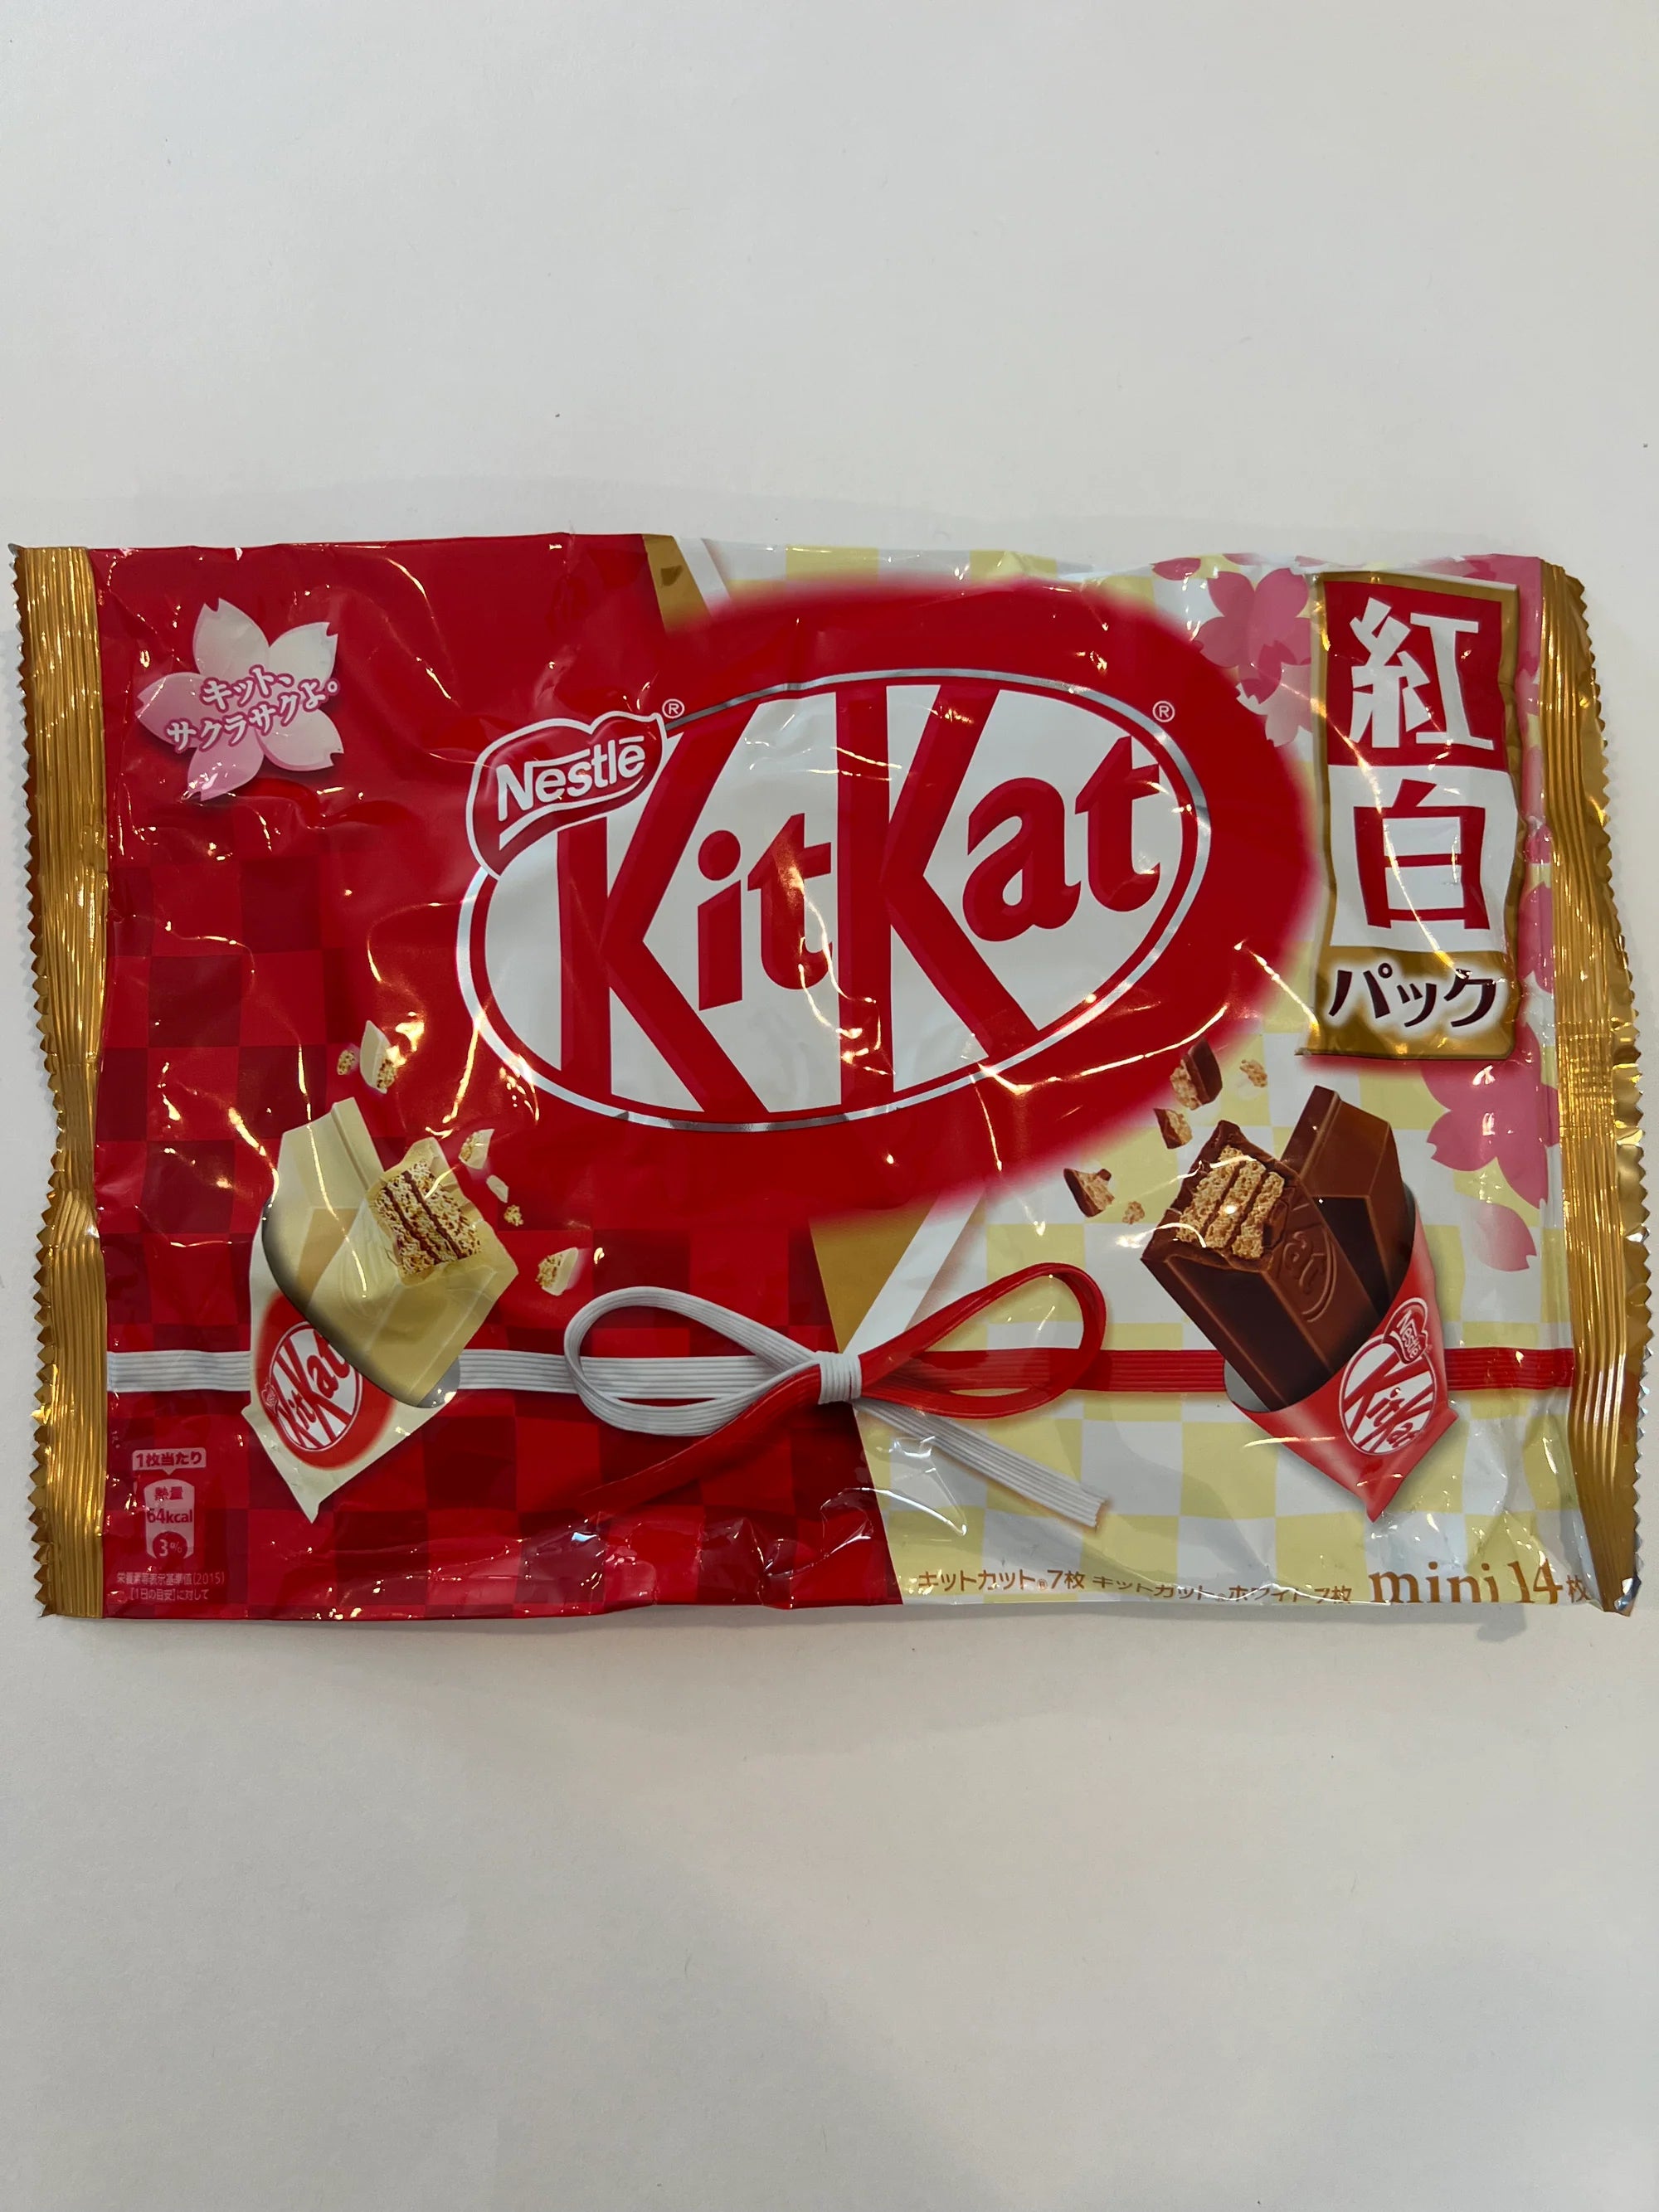 Kit Kat Red and White Chocolate Flavor